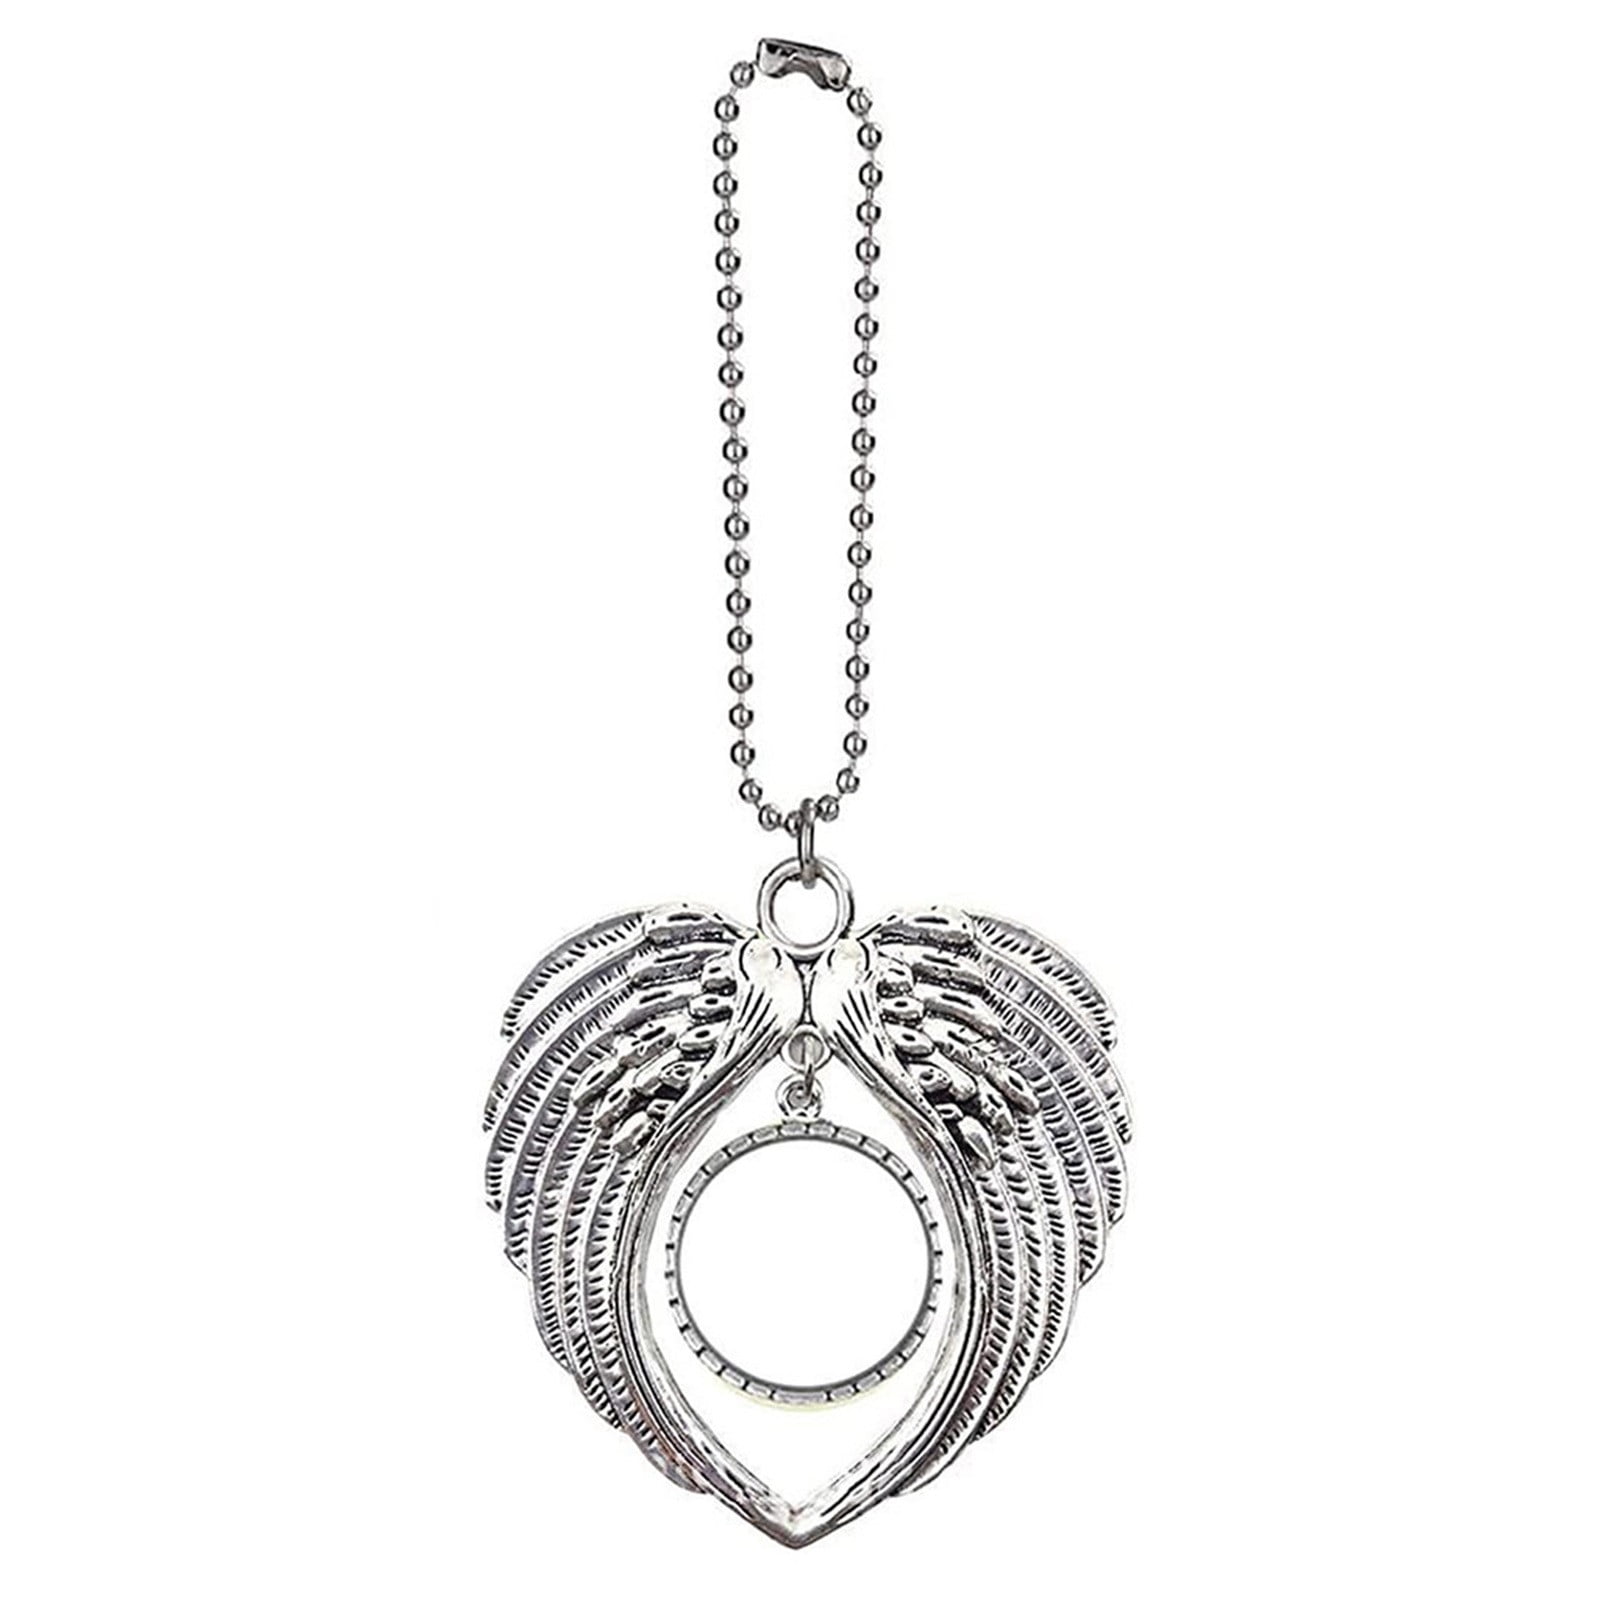 Christmas Tree Ornament Hanging Photo Bauble Decor Gifts Angel Wings Necklaces 